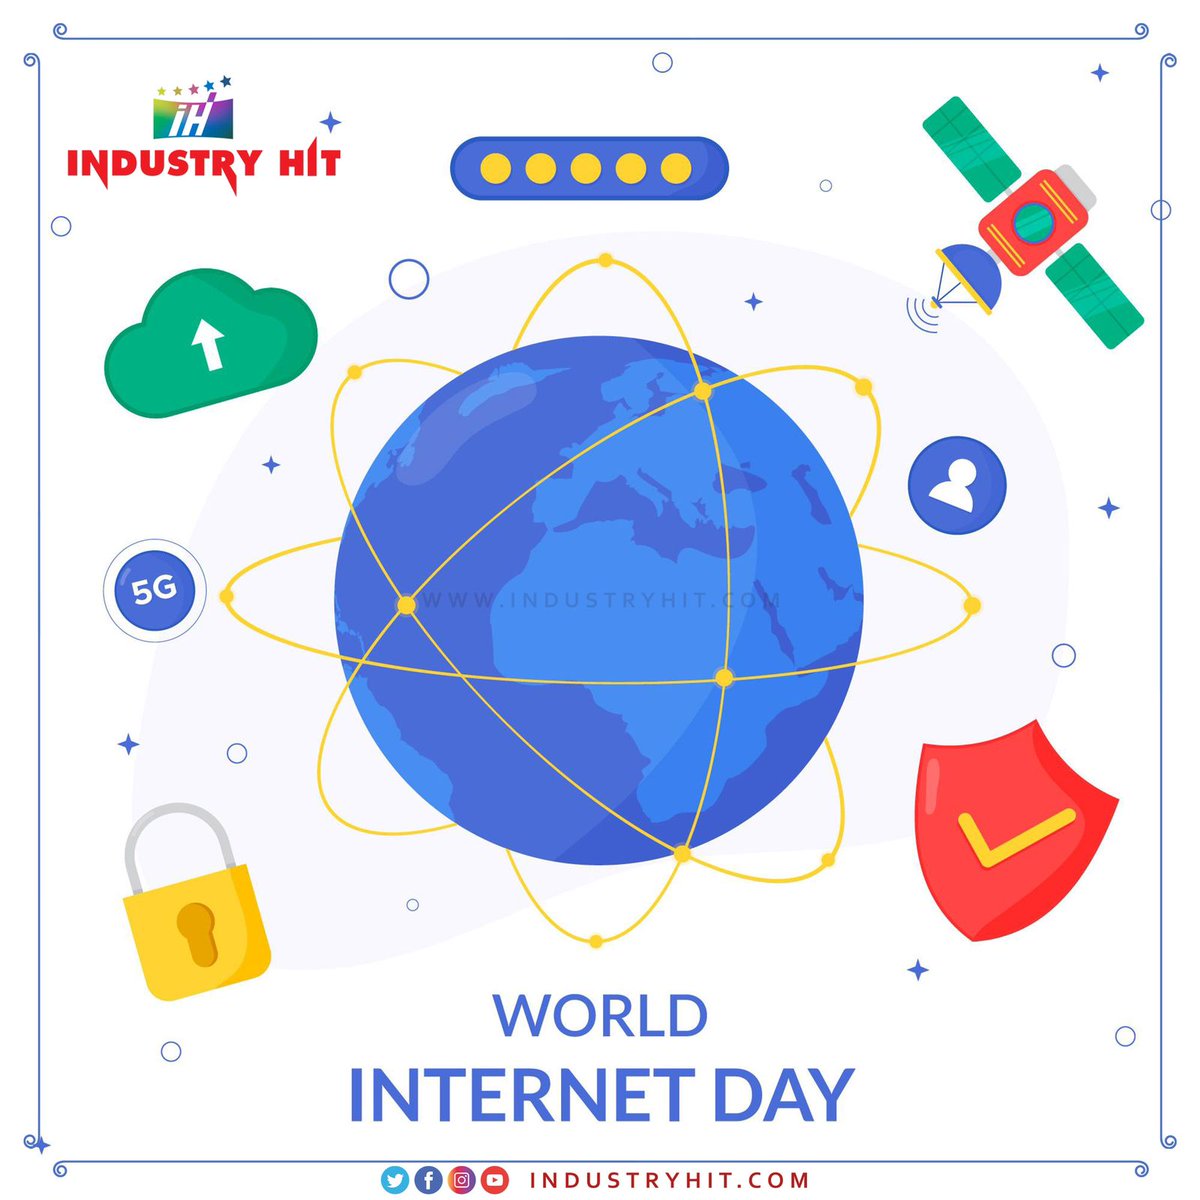 On International Internet Day Today, lets celebrate the invention and development that the internet has brought us so far. #WorldInternetDay #InternationalInternetDay 🌐